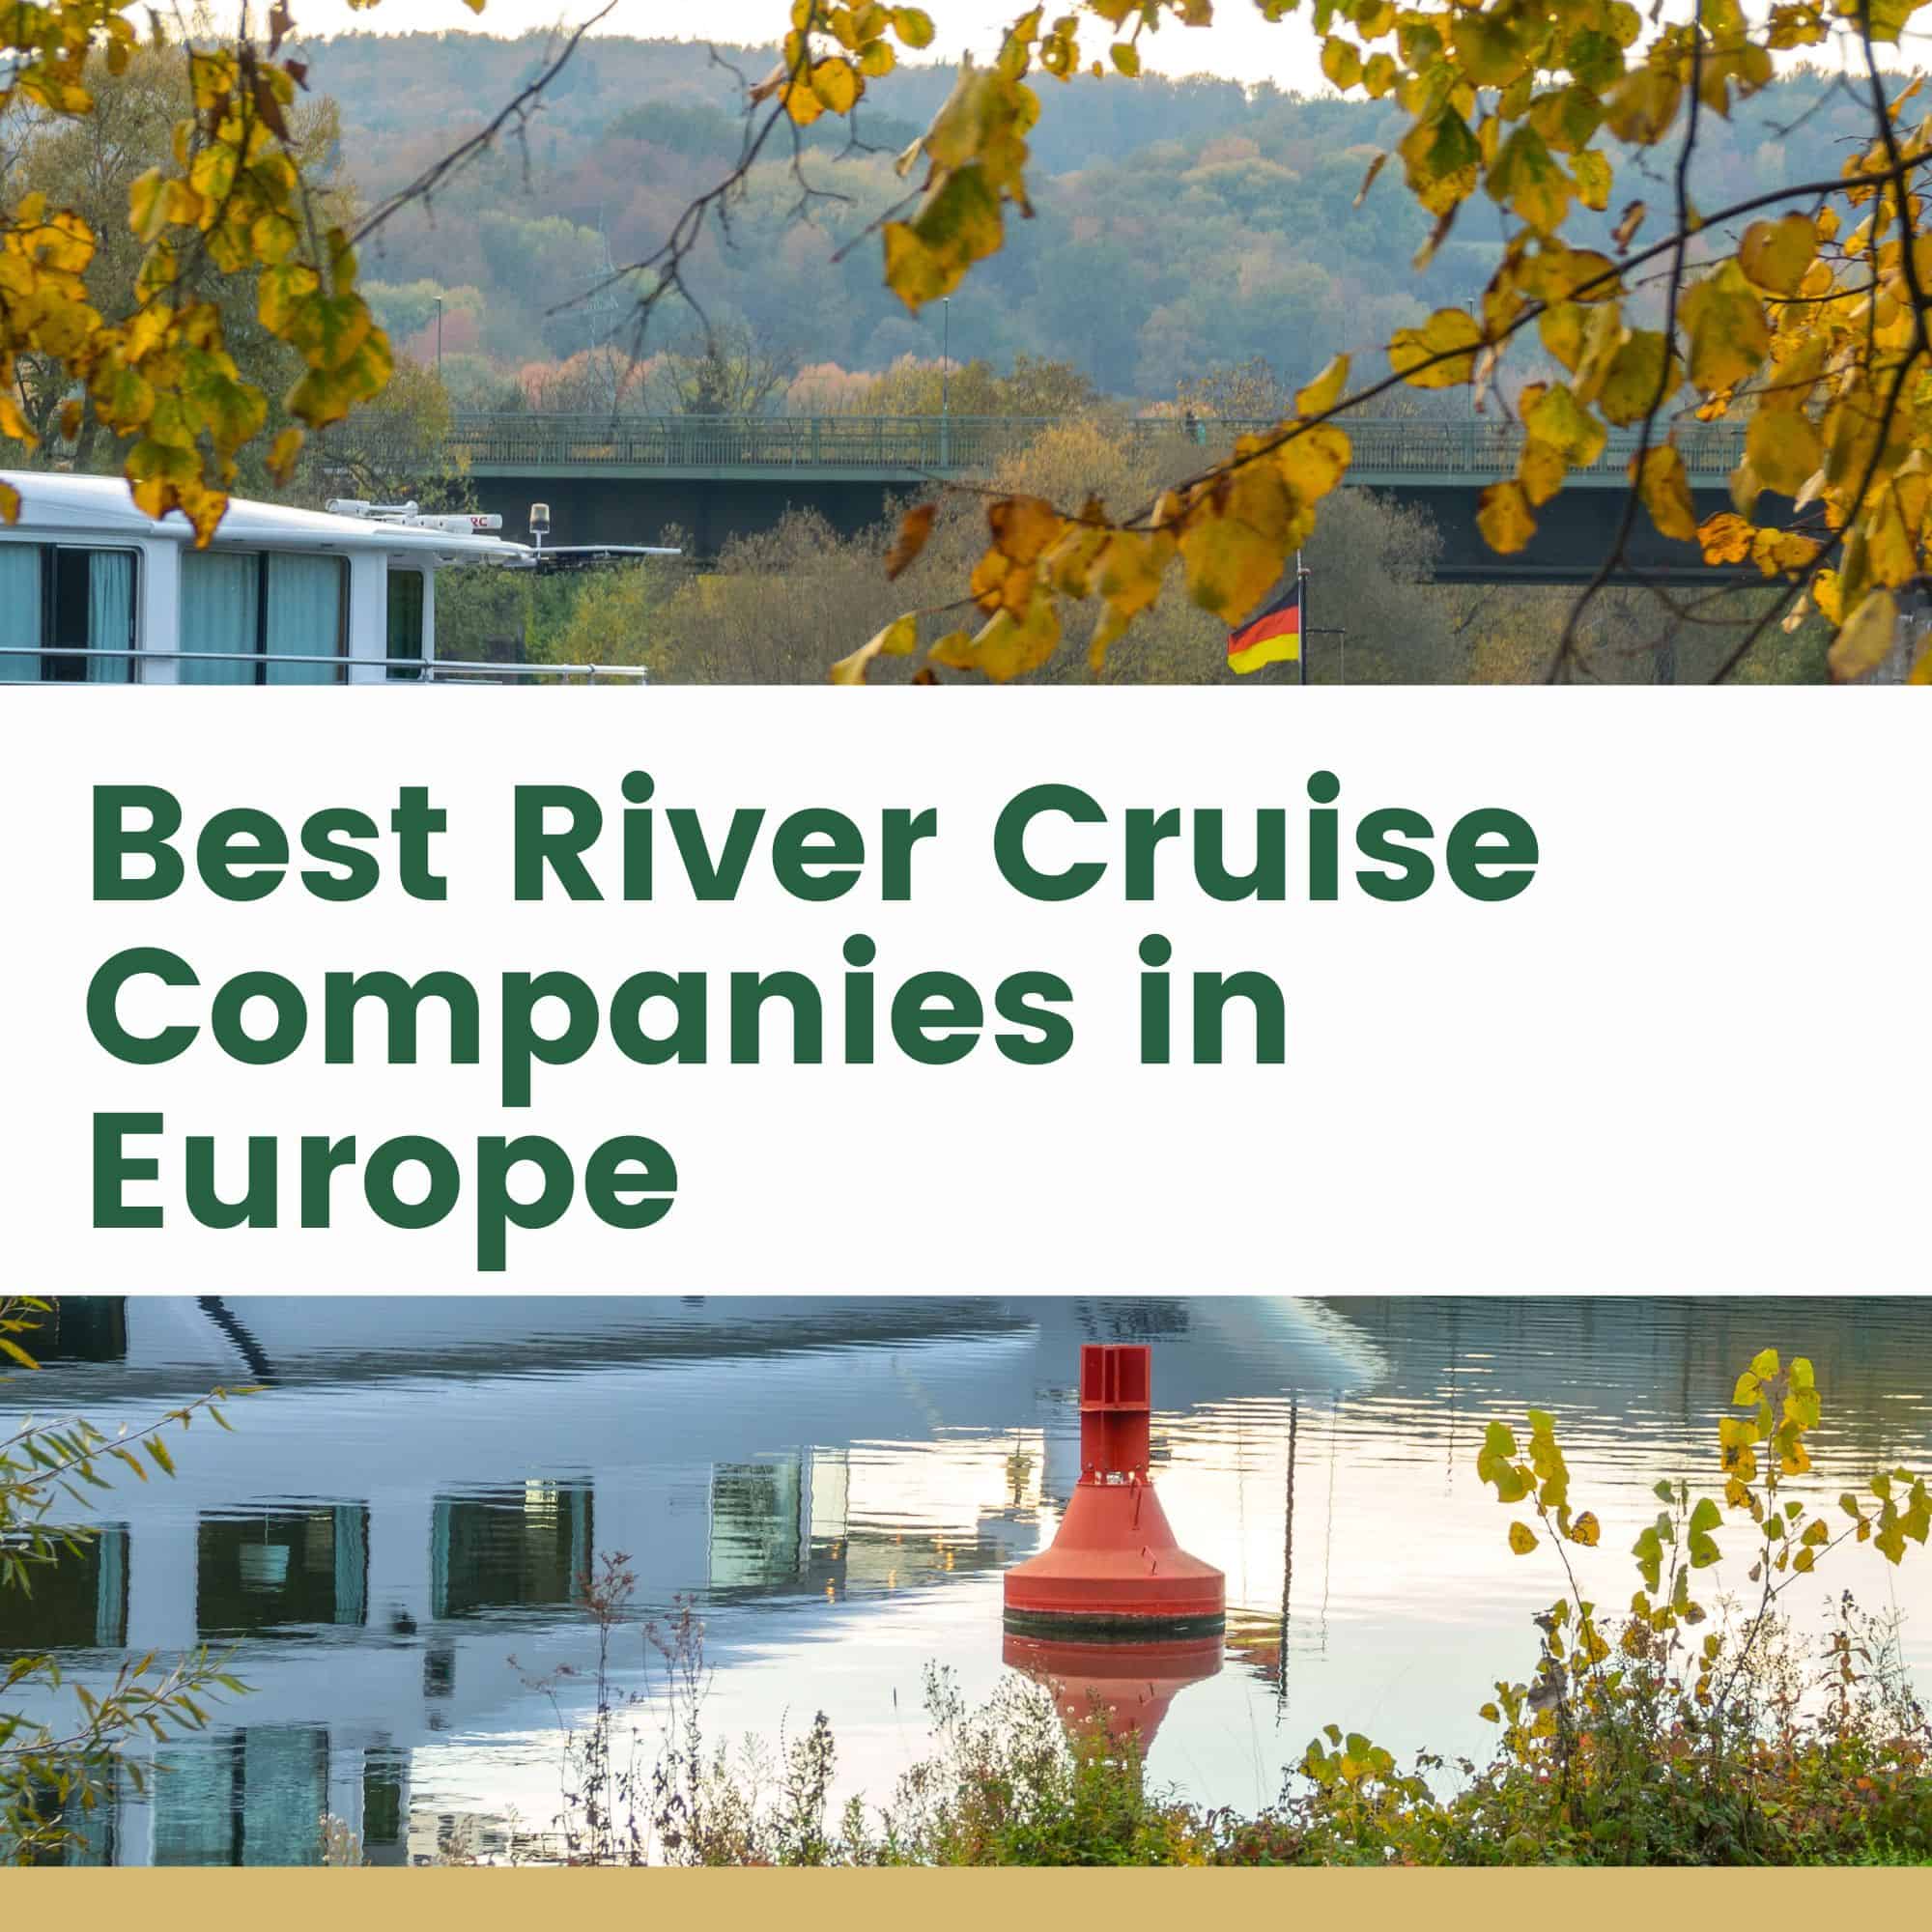 Best River Cruise Companies in Europe